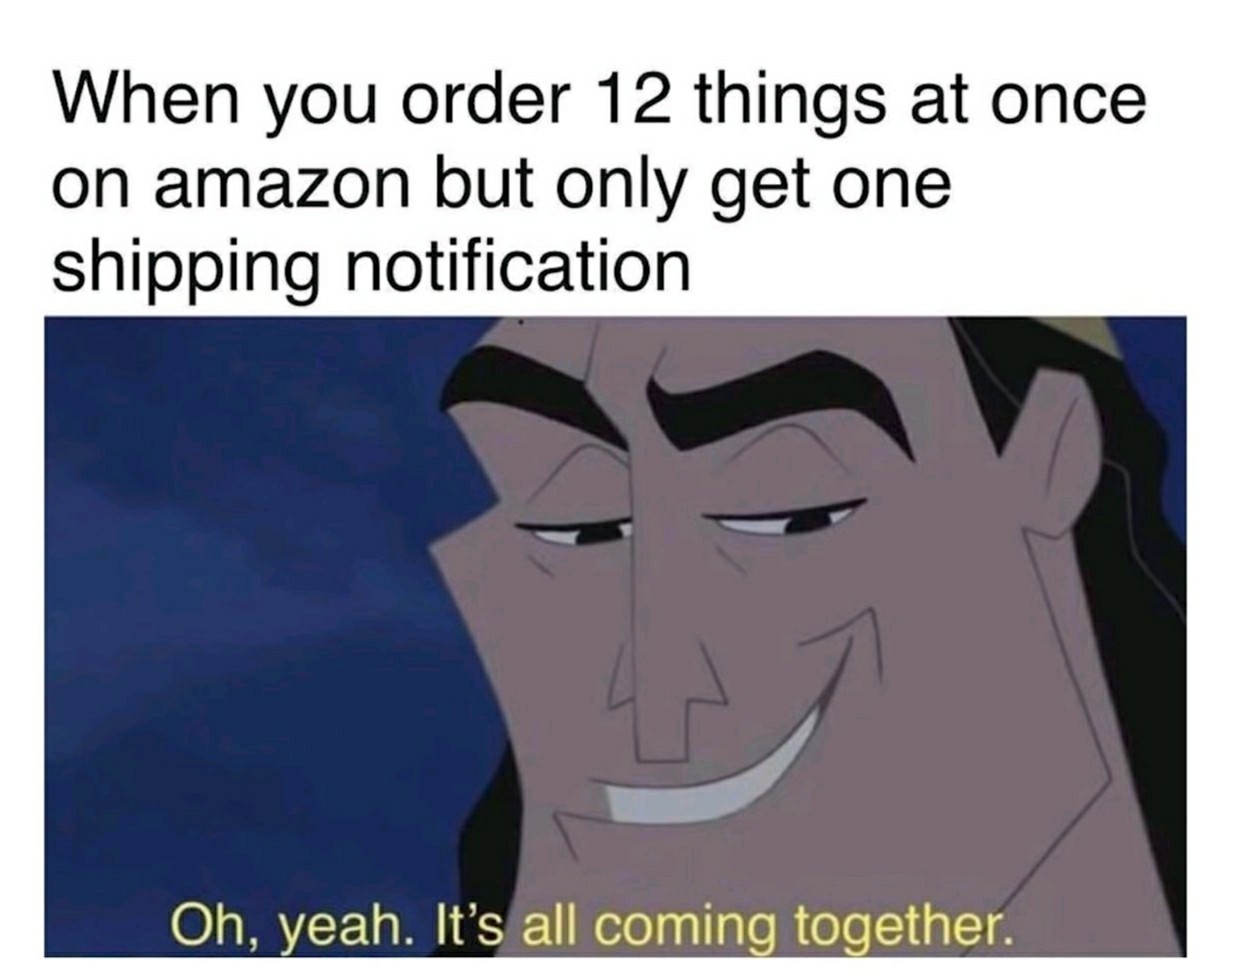 amazon-meme-004-when-you-order-12-things-at-once-but-only ...